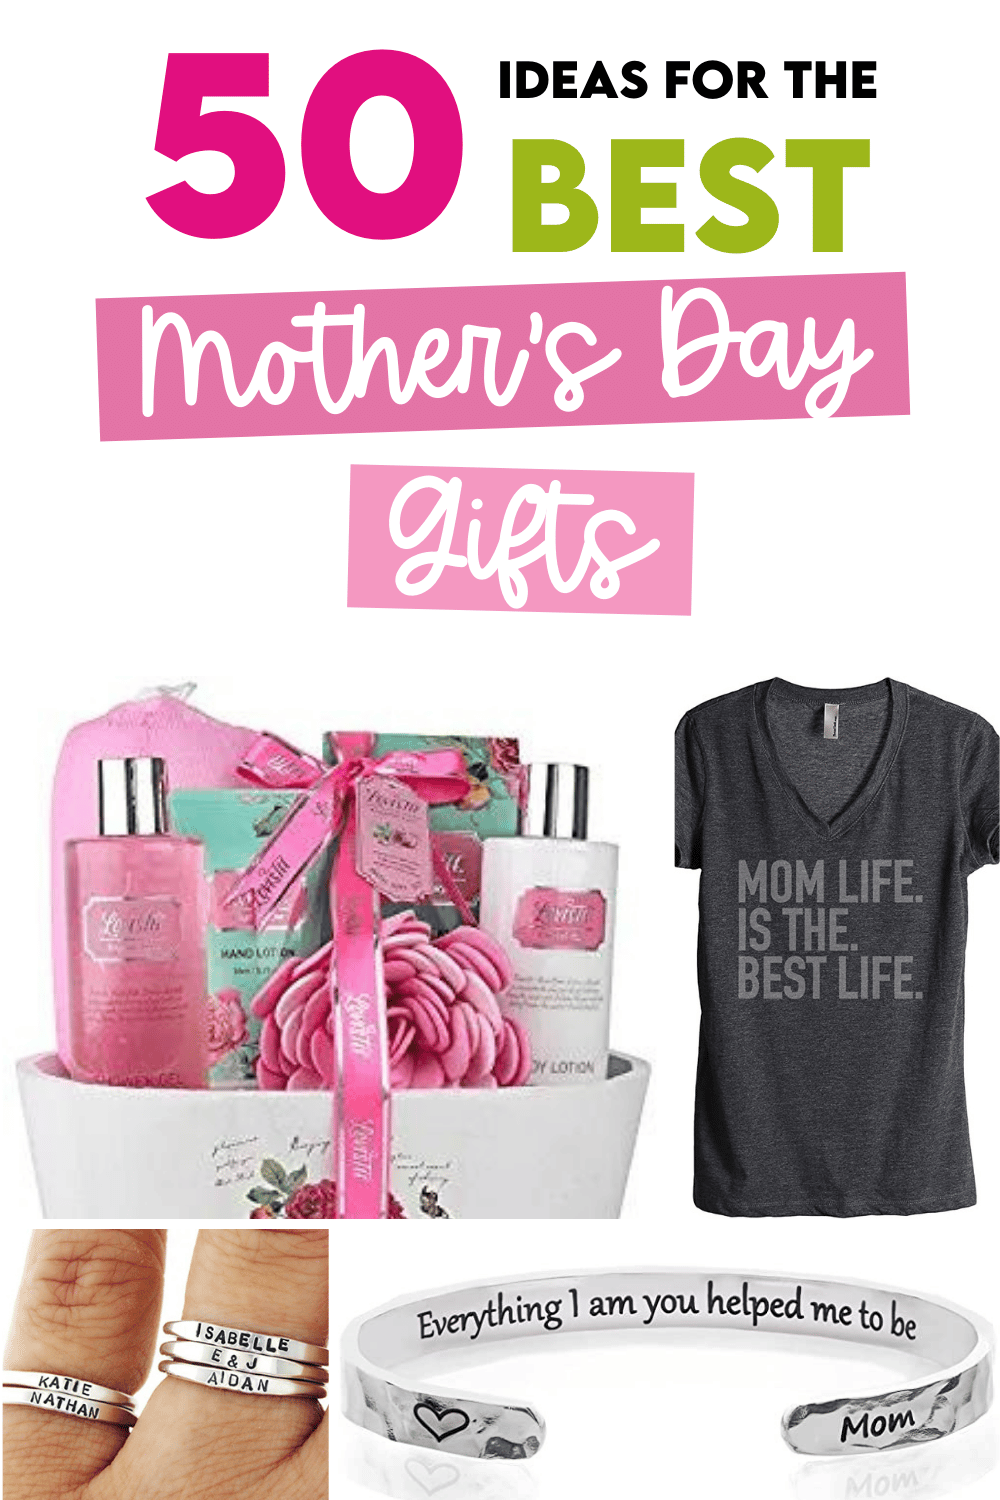 https://www.thedatingdivas.com/wp-content/uploads/2018/05/50-of-the-Best-Mothers-Day-Gift-Ideas.png